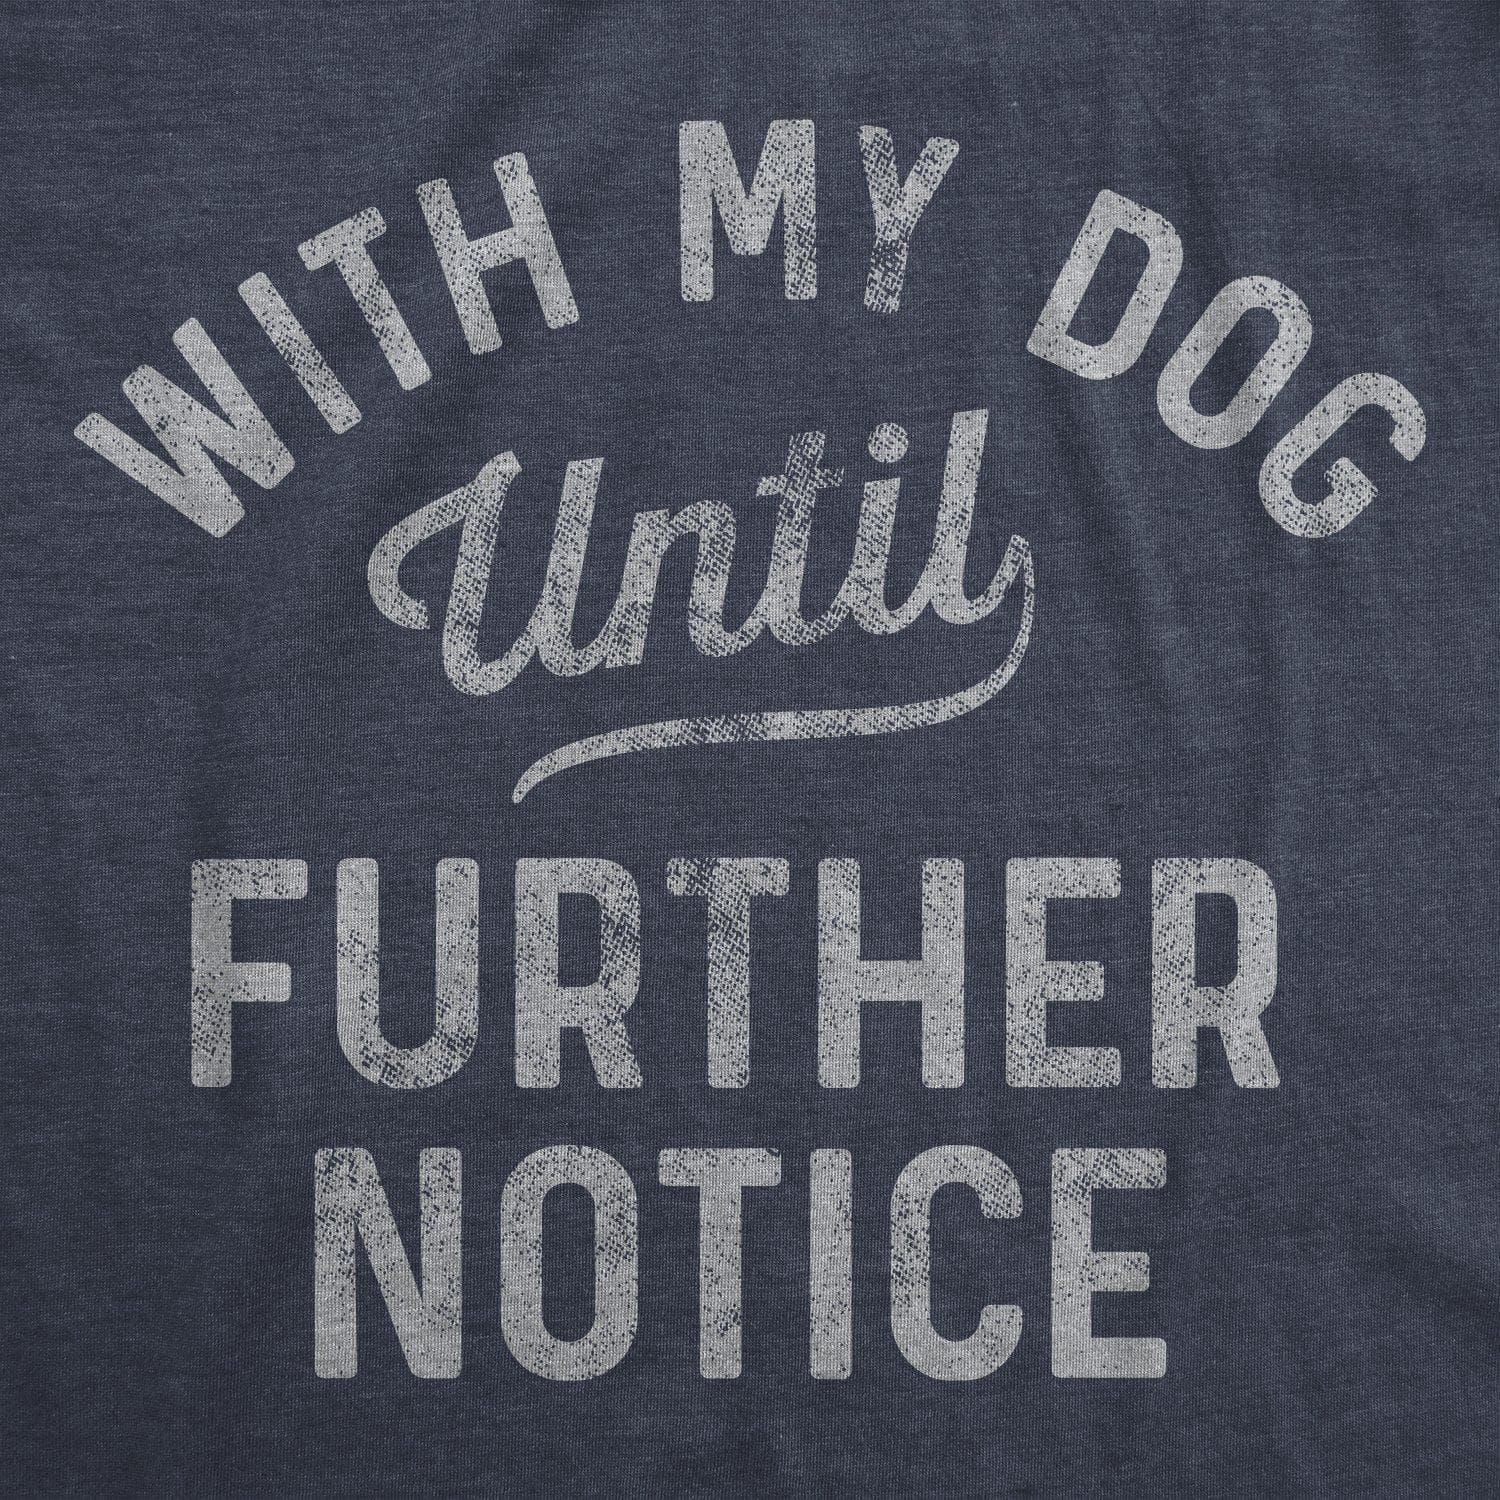 With My Dog Until Further Notice Men's Tshirt - Crazy Dog T-Shirts